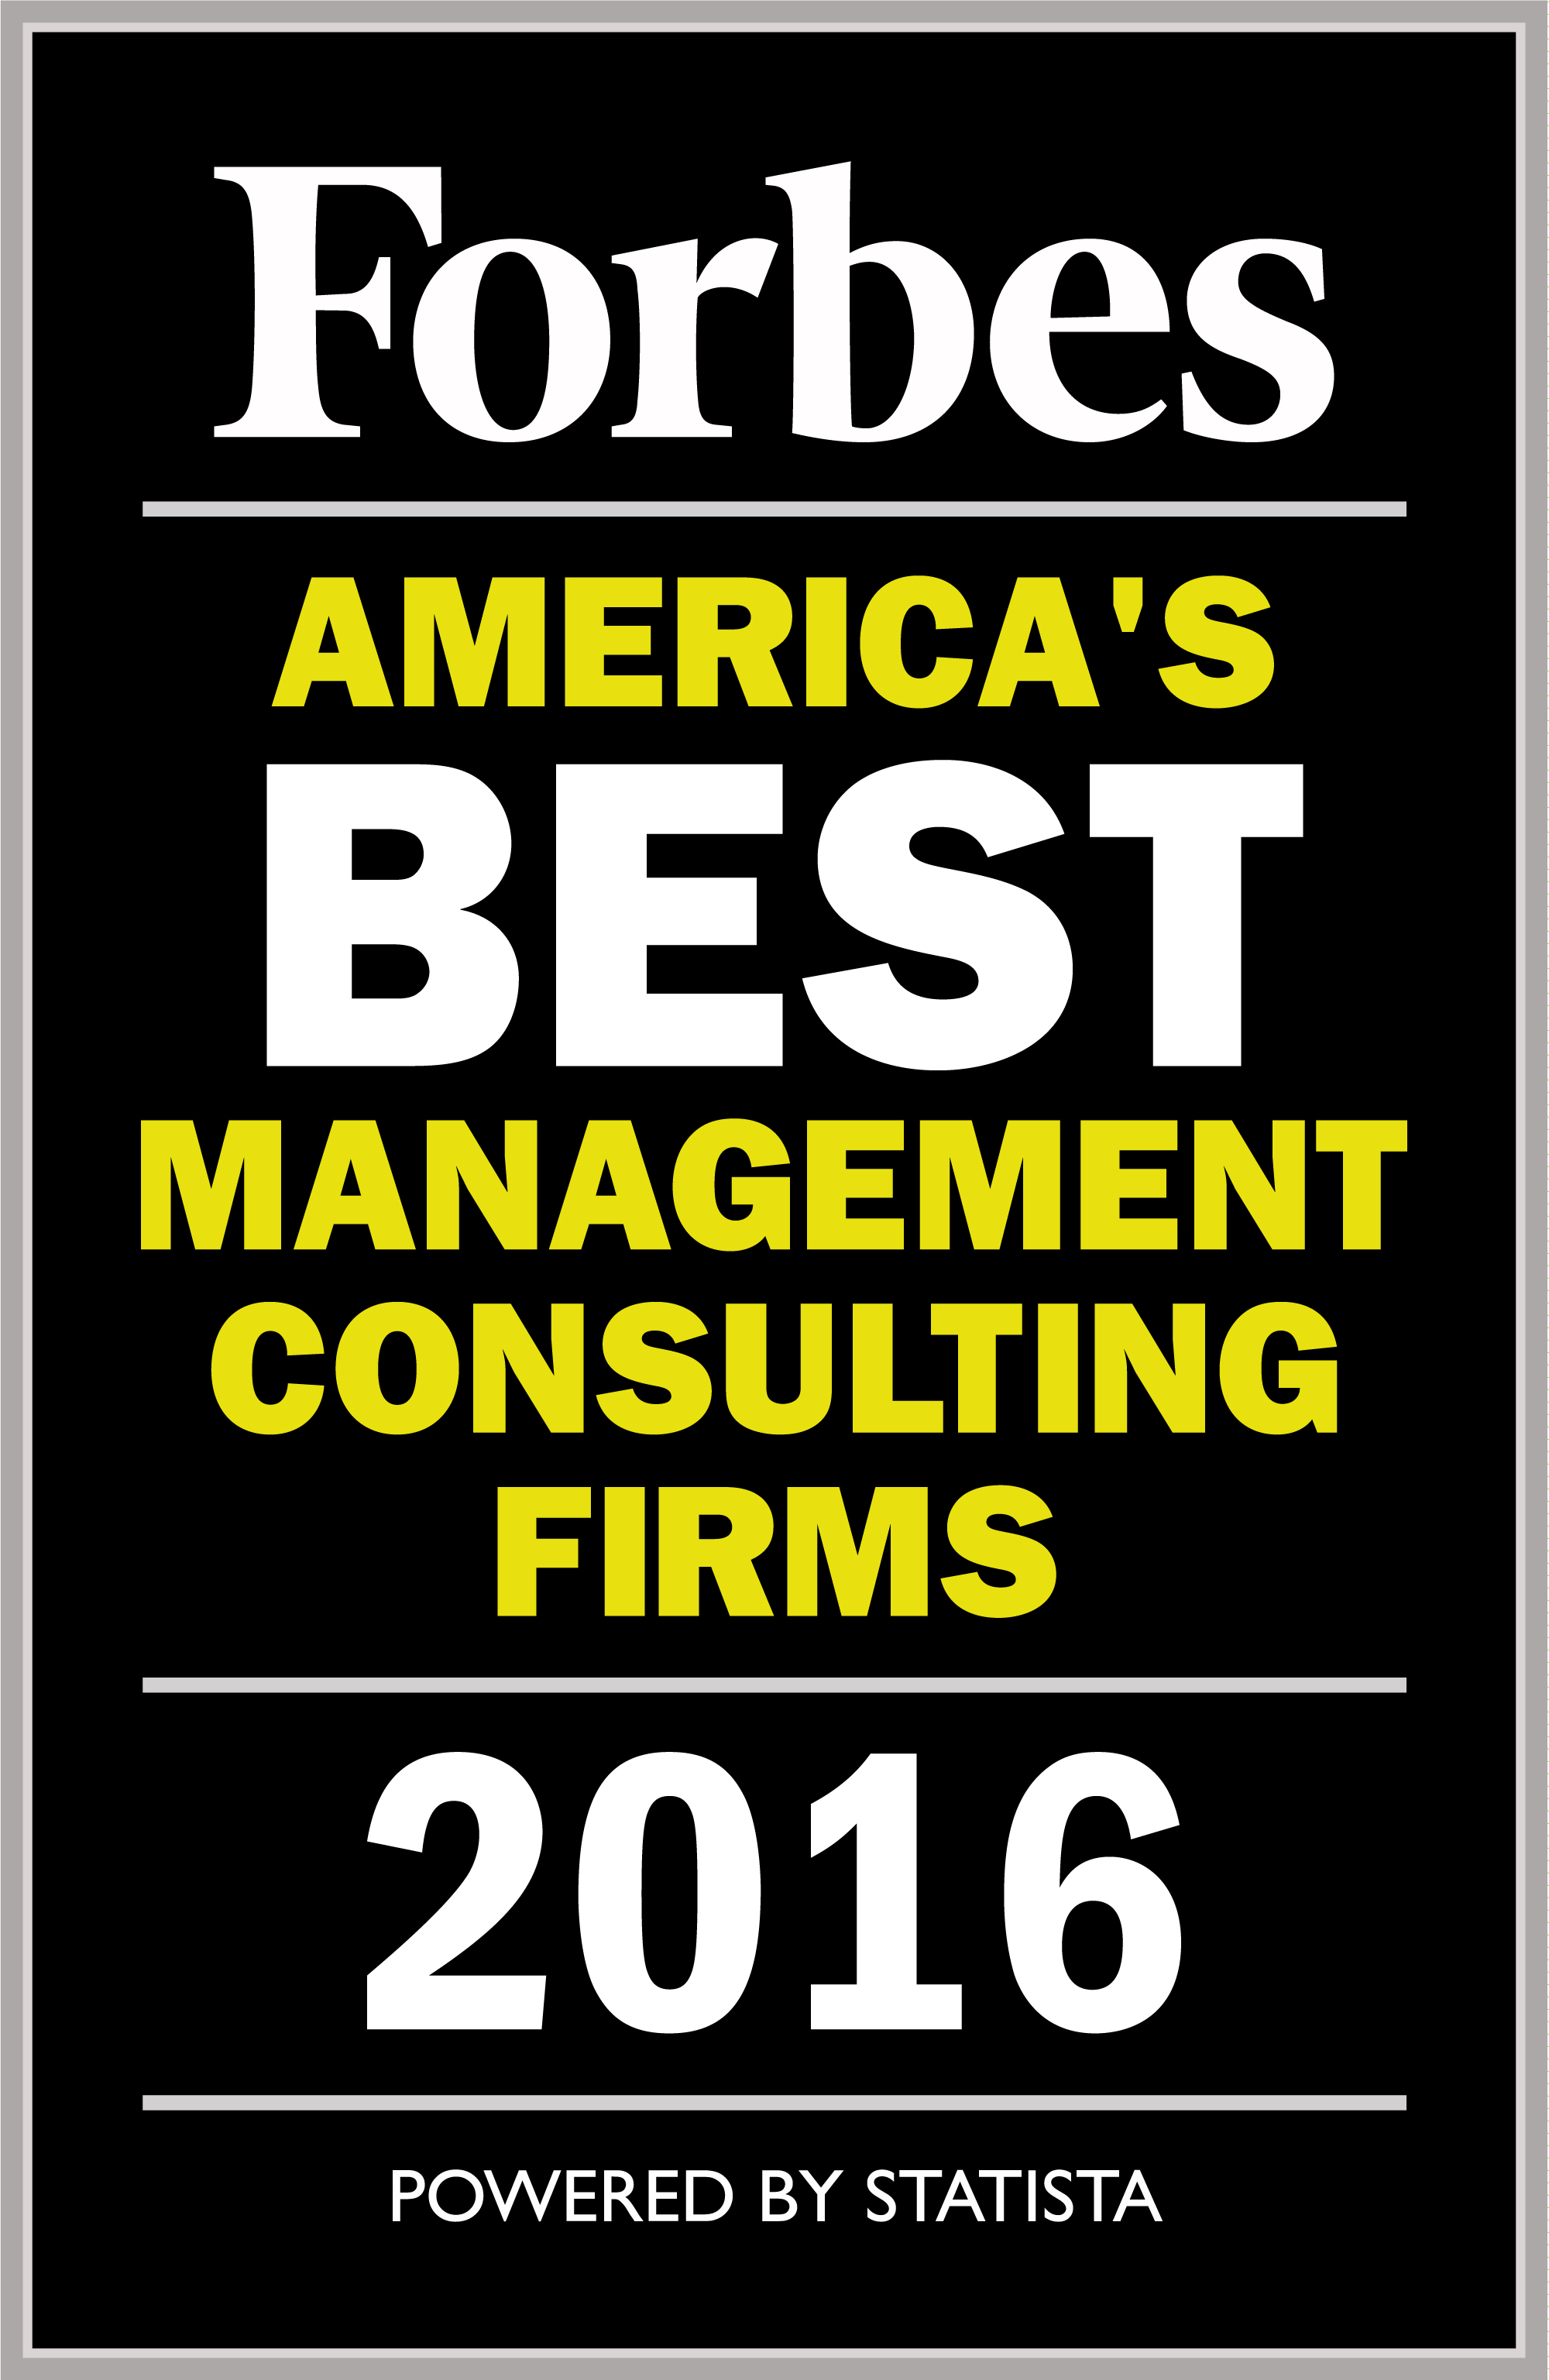 Forbes Names SDG to its List of America’s Best Management Consulting Firms